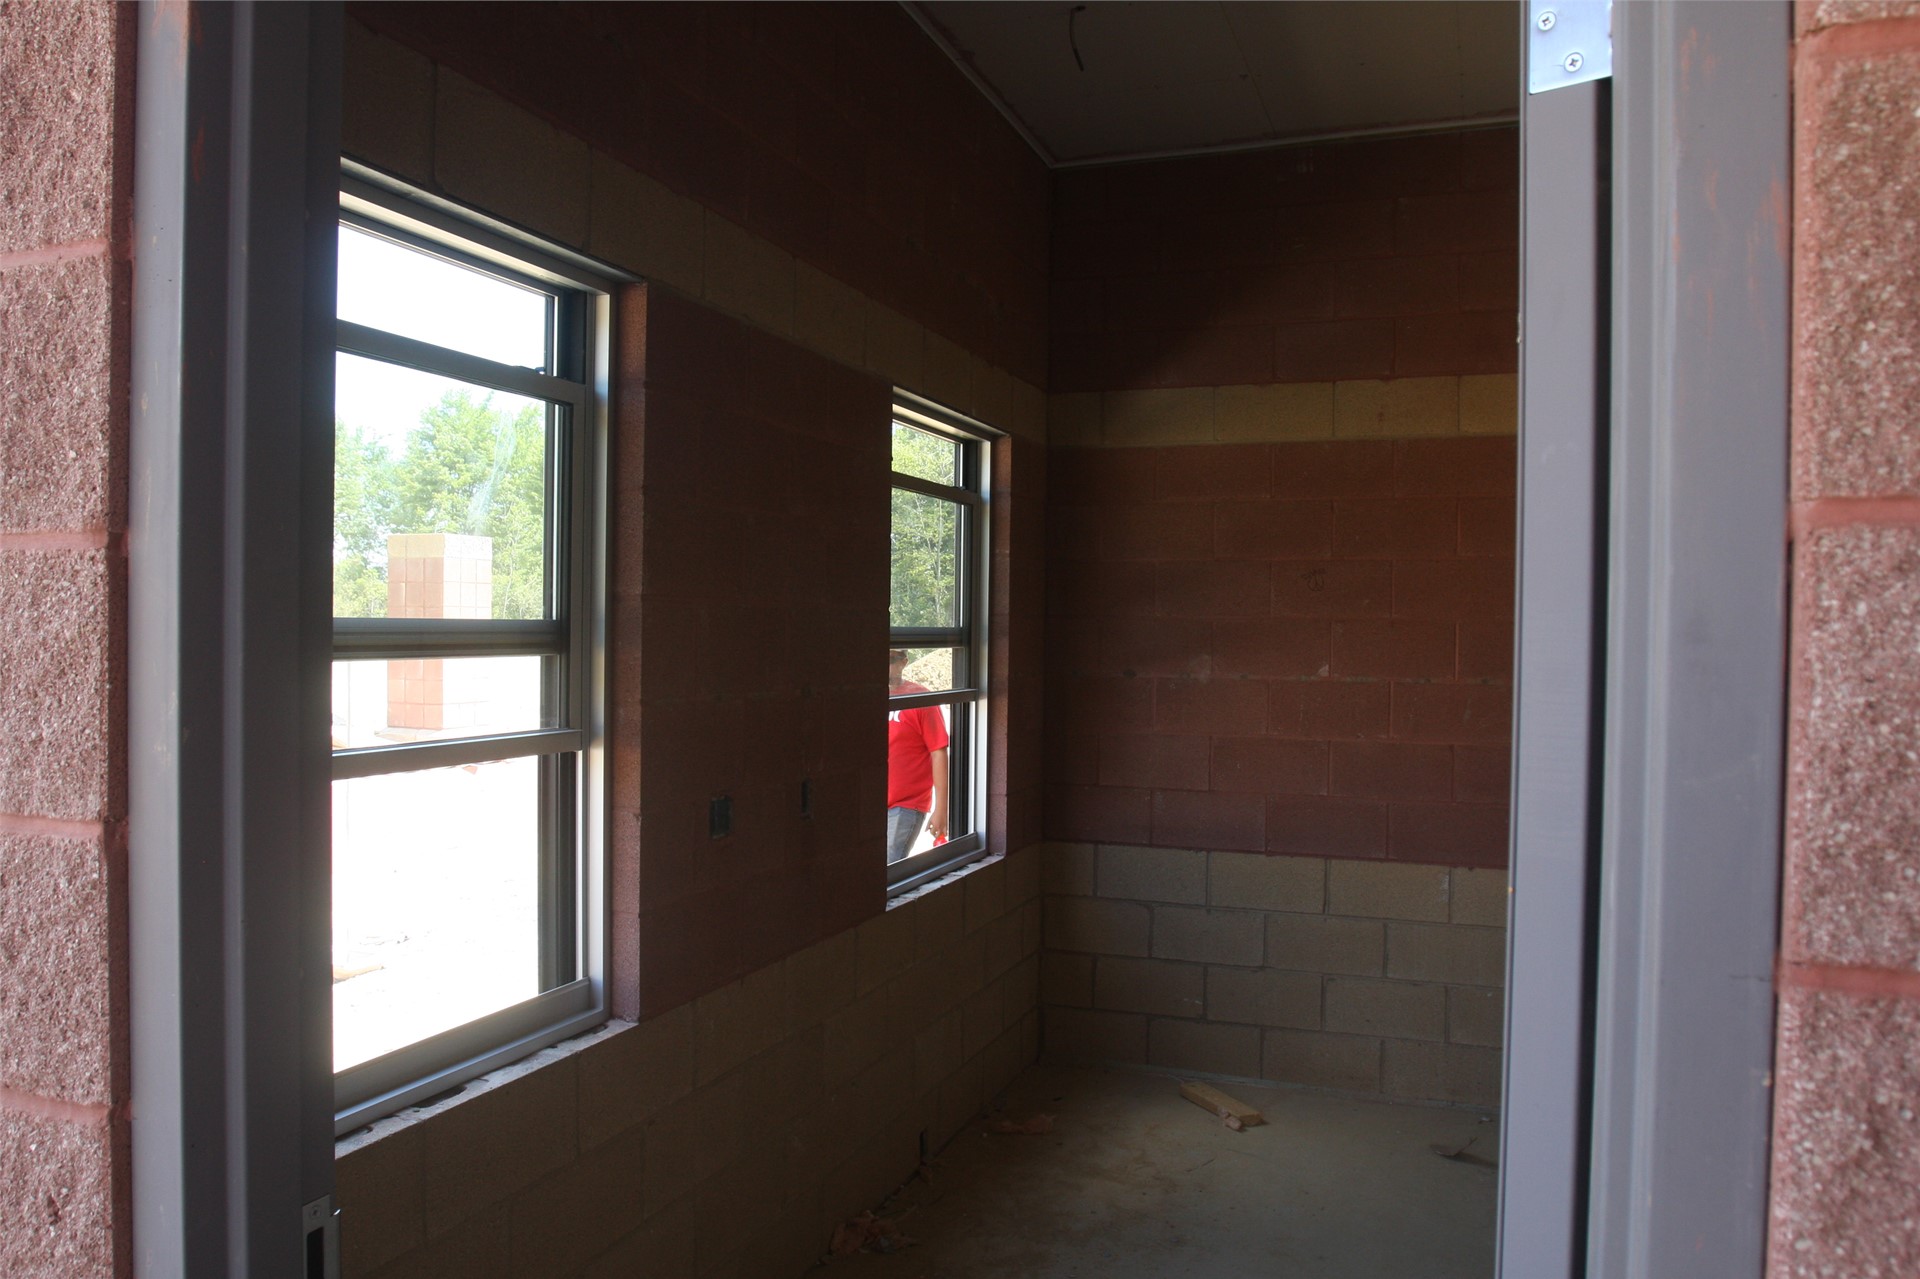 Windows have been installed in the ticket booth